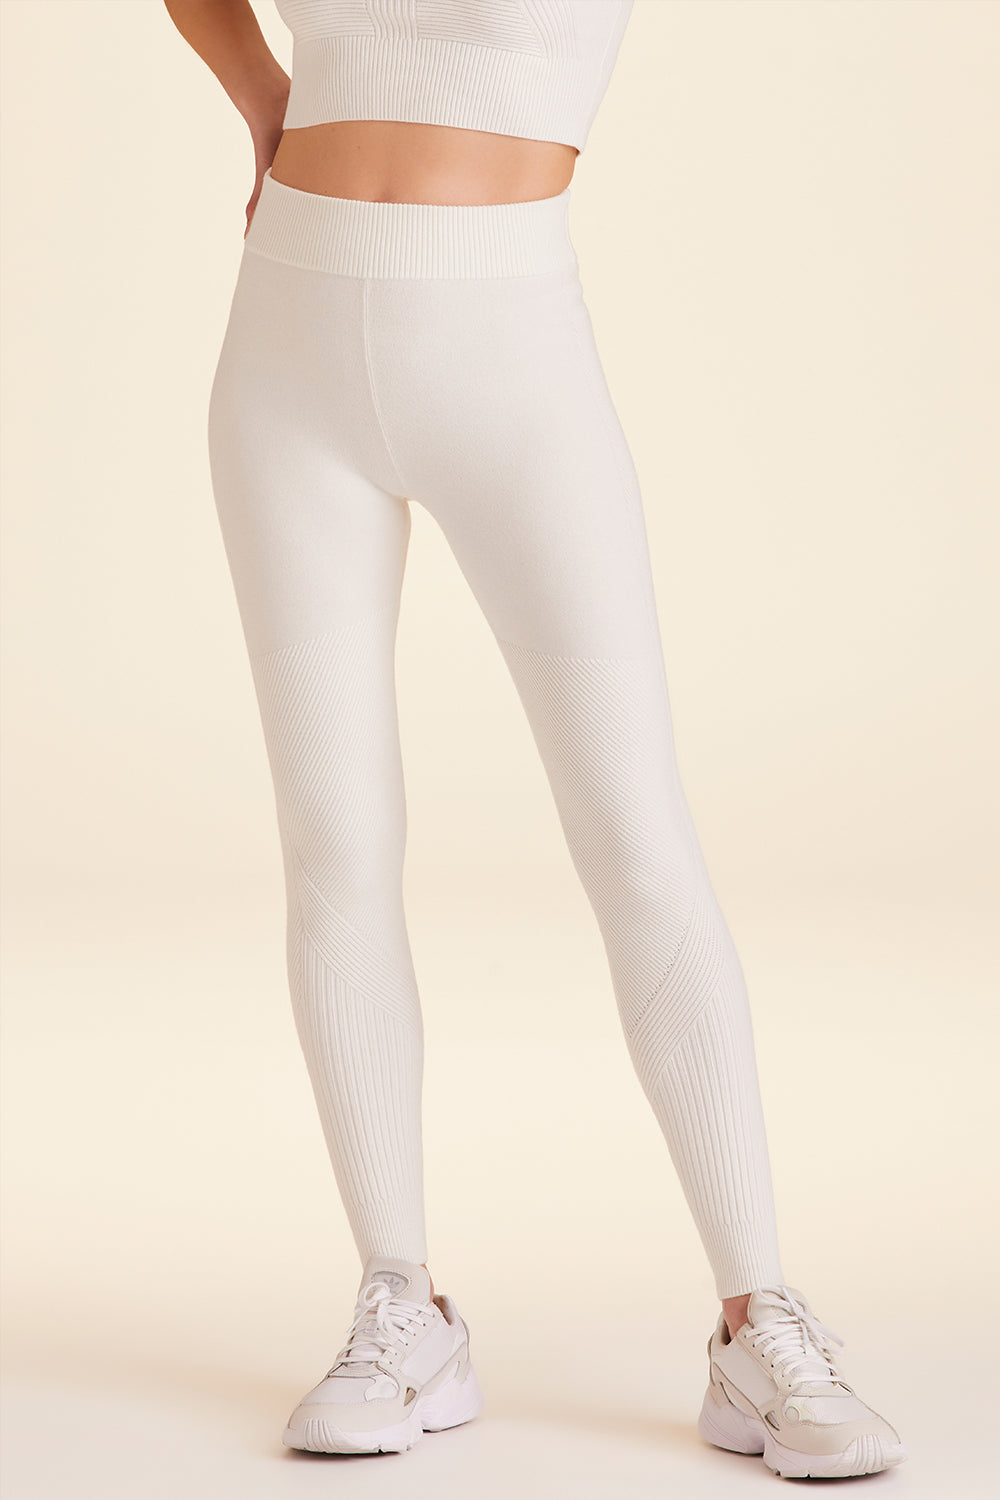 Image of Goddess Cashmere Tight